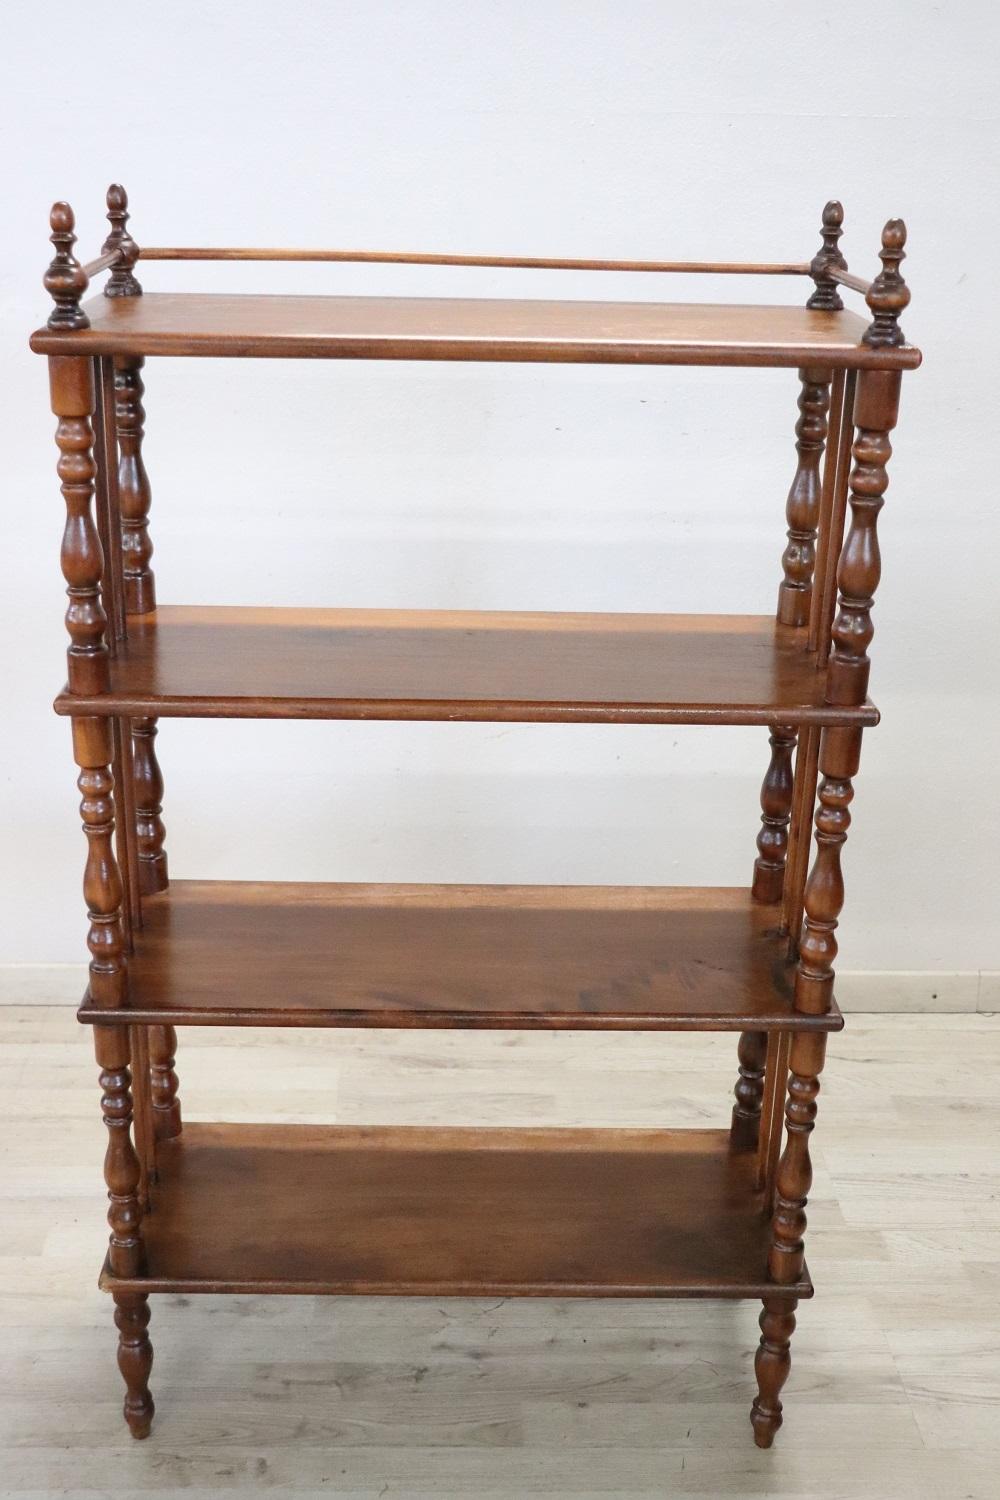 19th century of the period Louis Philippe italian antique étagère. Made in solid poplar wood and characterized by refined turned columns. Equipped with four shelves available to display your objects or books. The distance between the shelves is 30